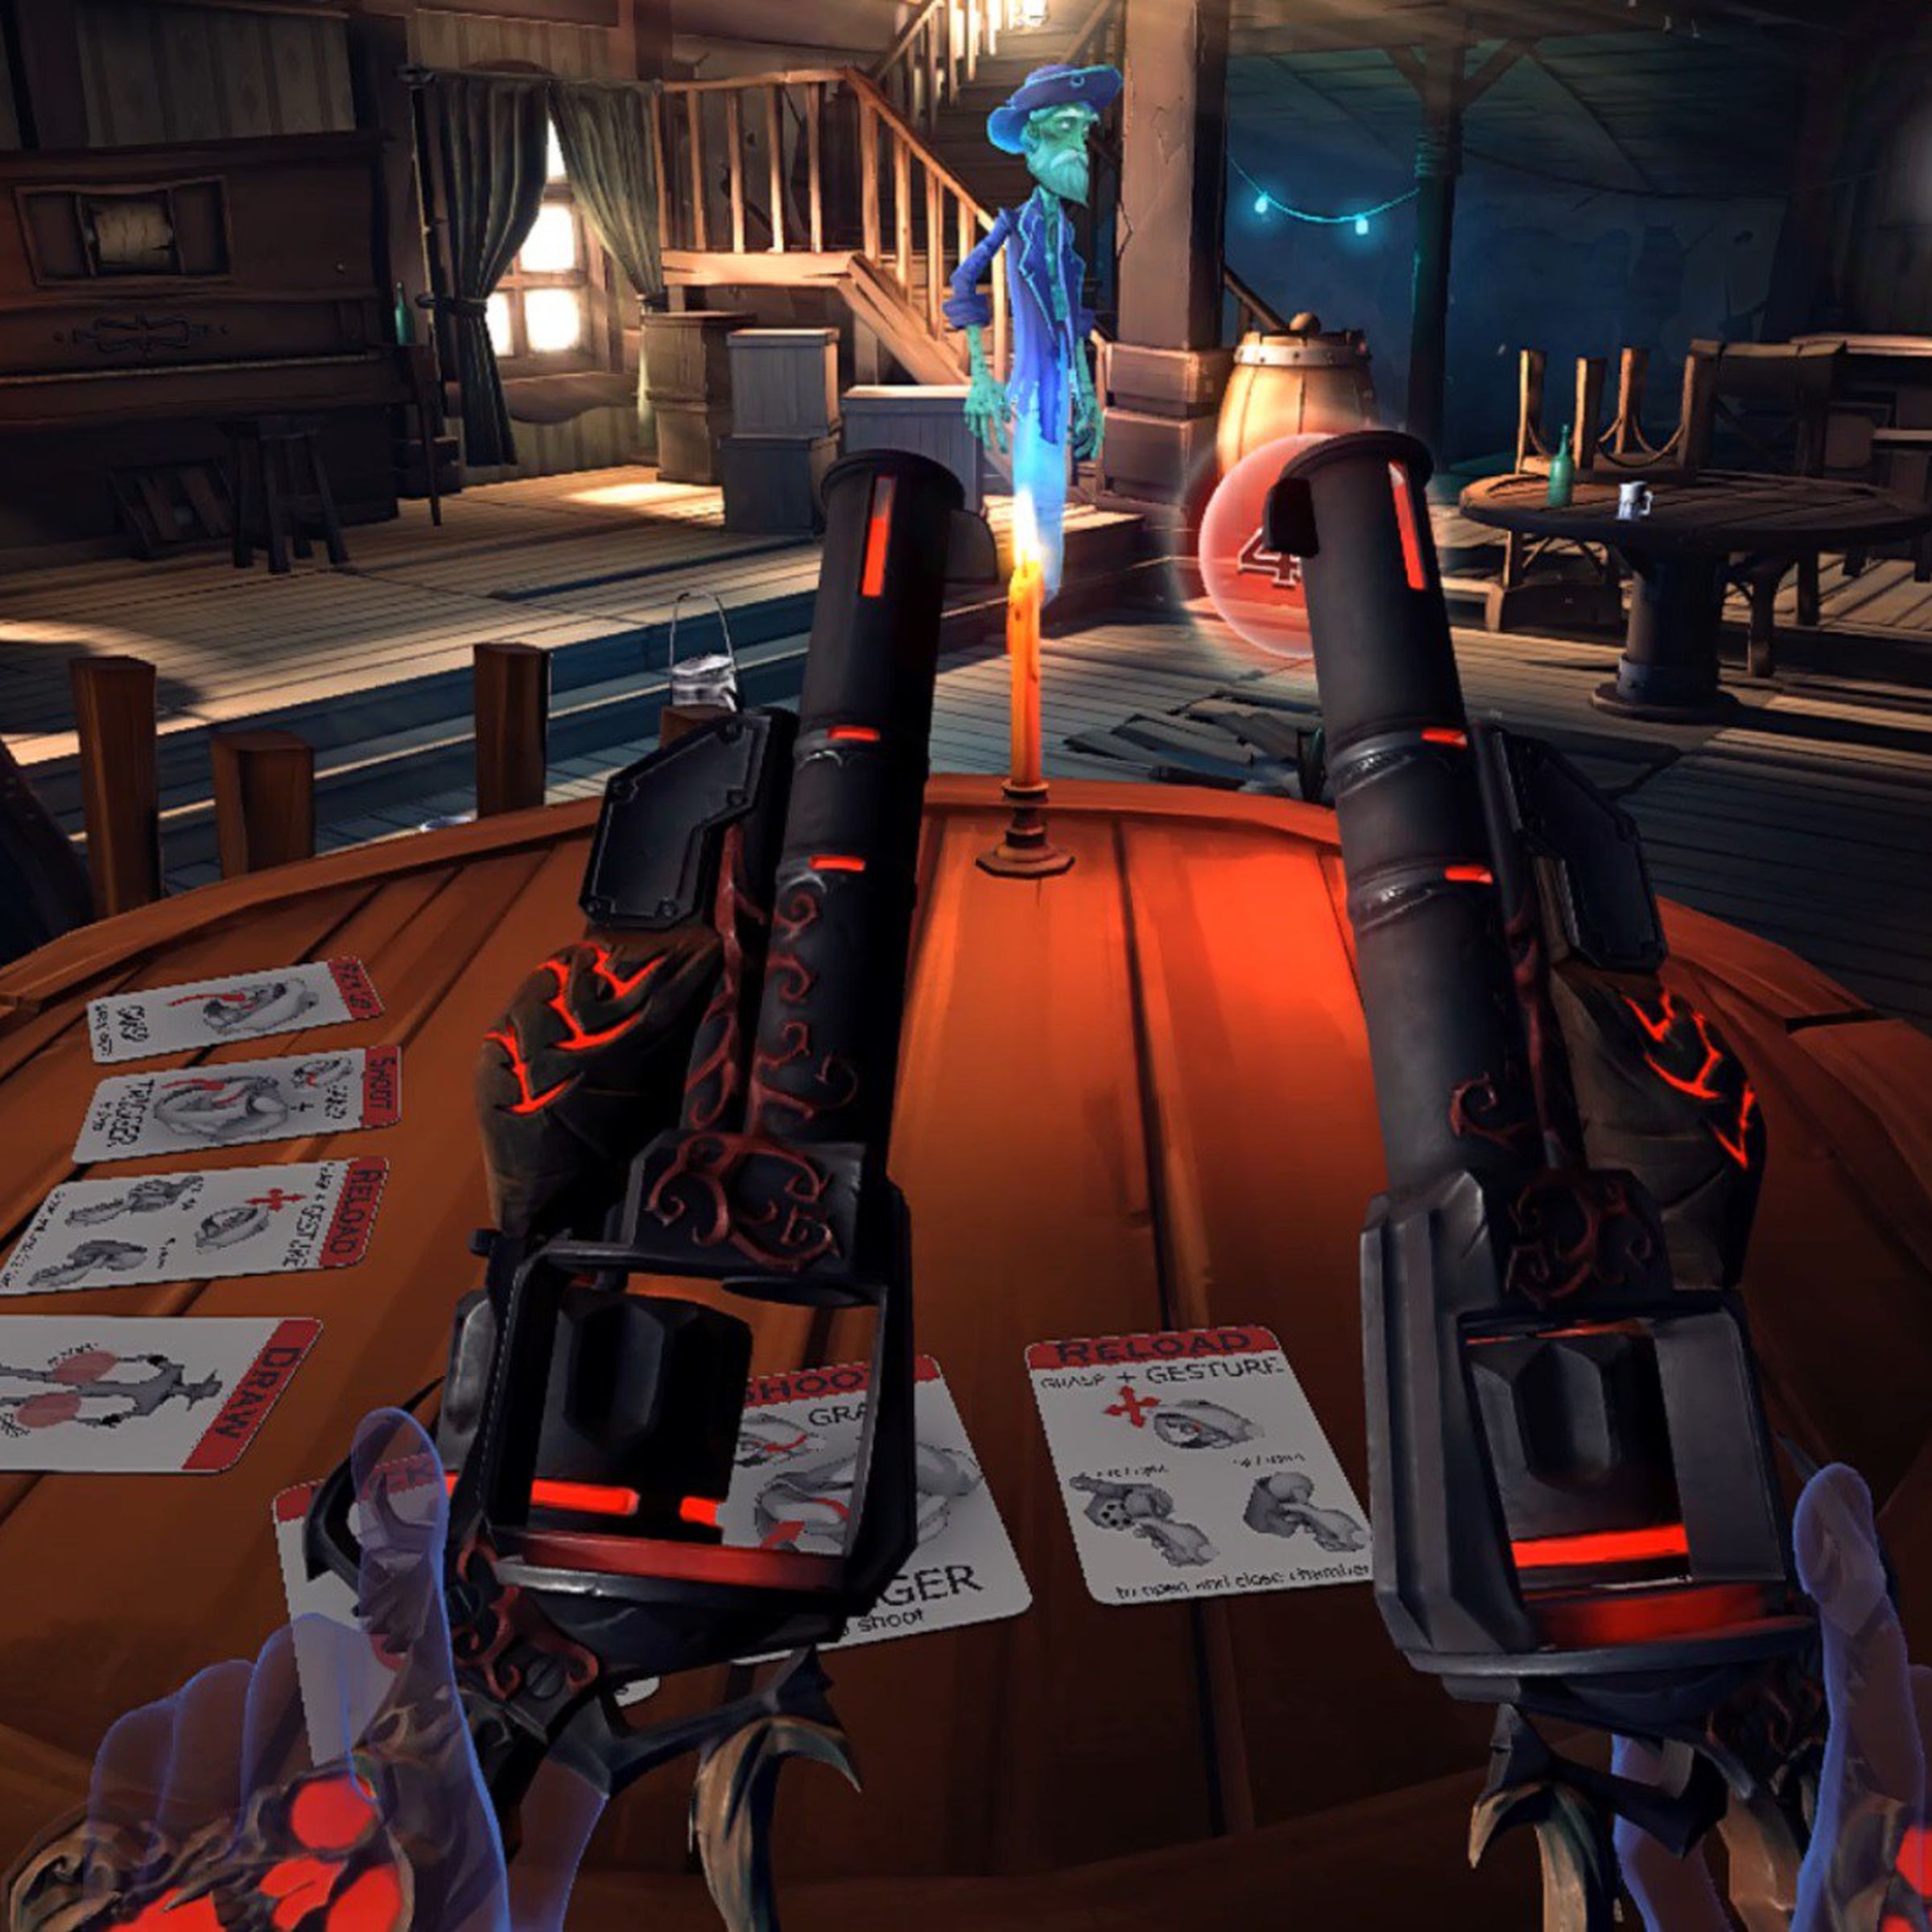 POV: a pair of drawn demonic pistols above a card game in a saloon.